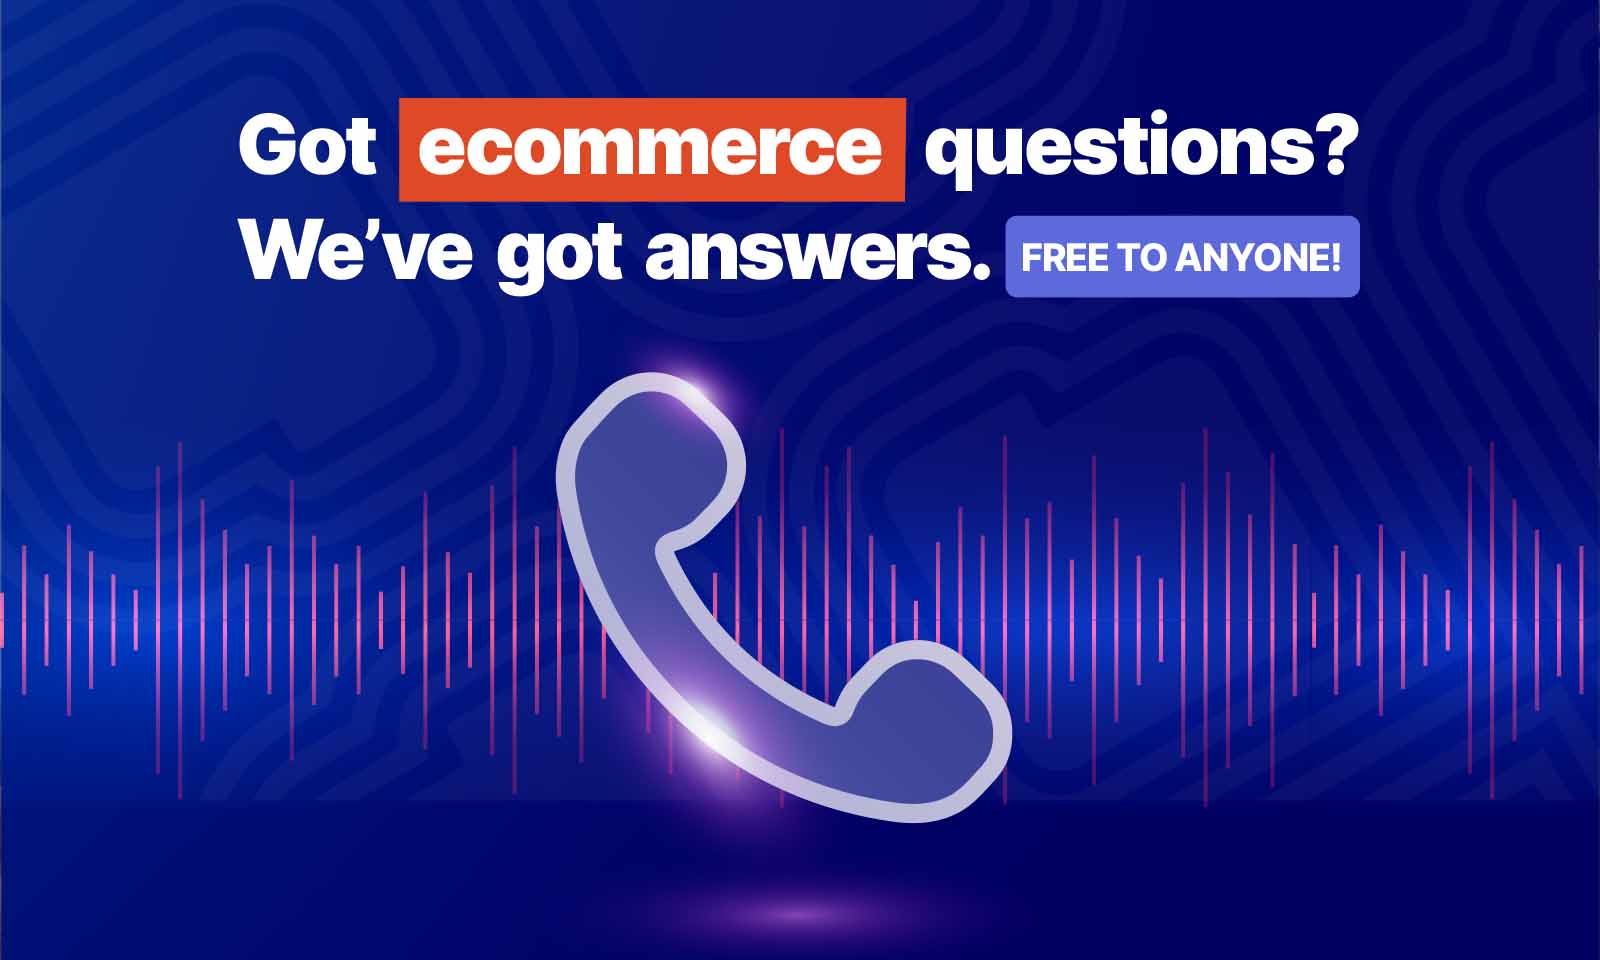 The Ecommerce Hotline is Here!